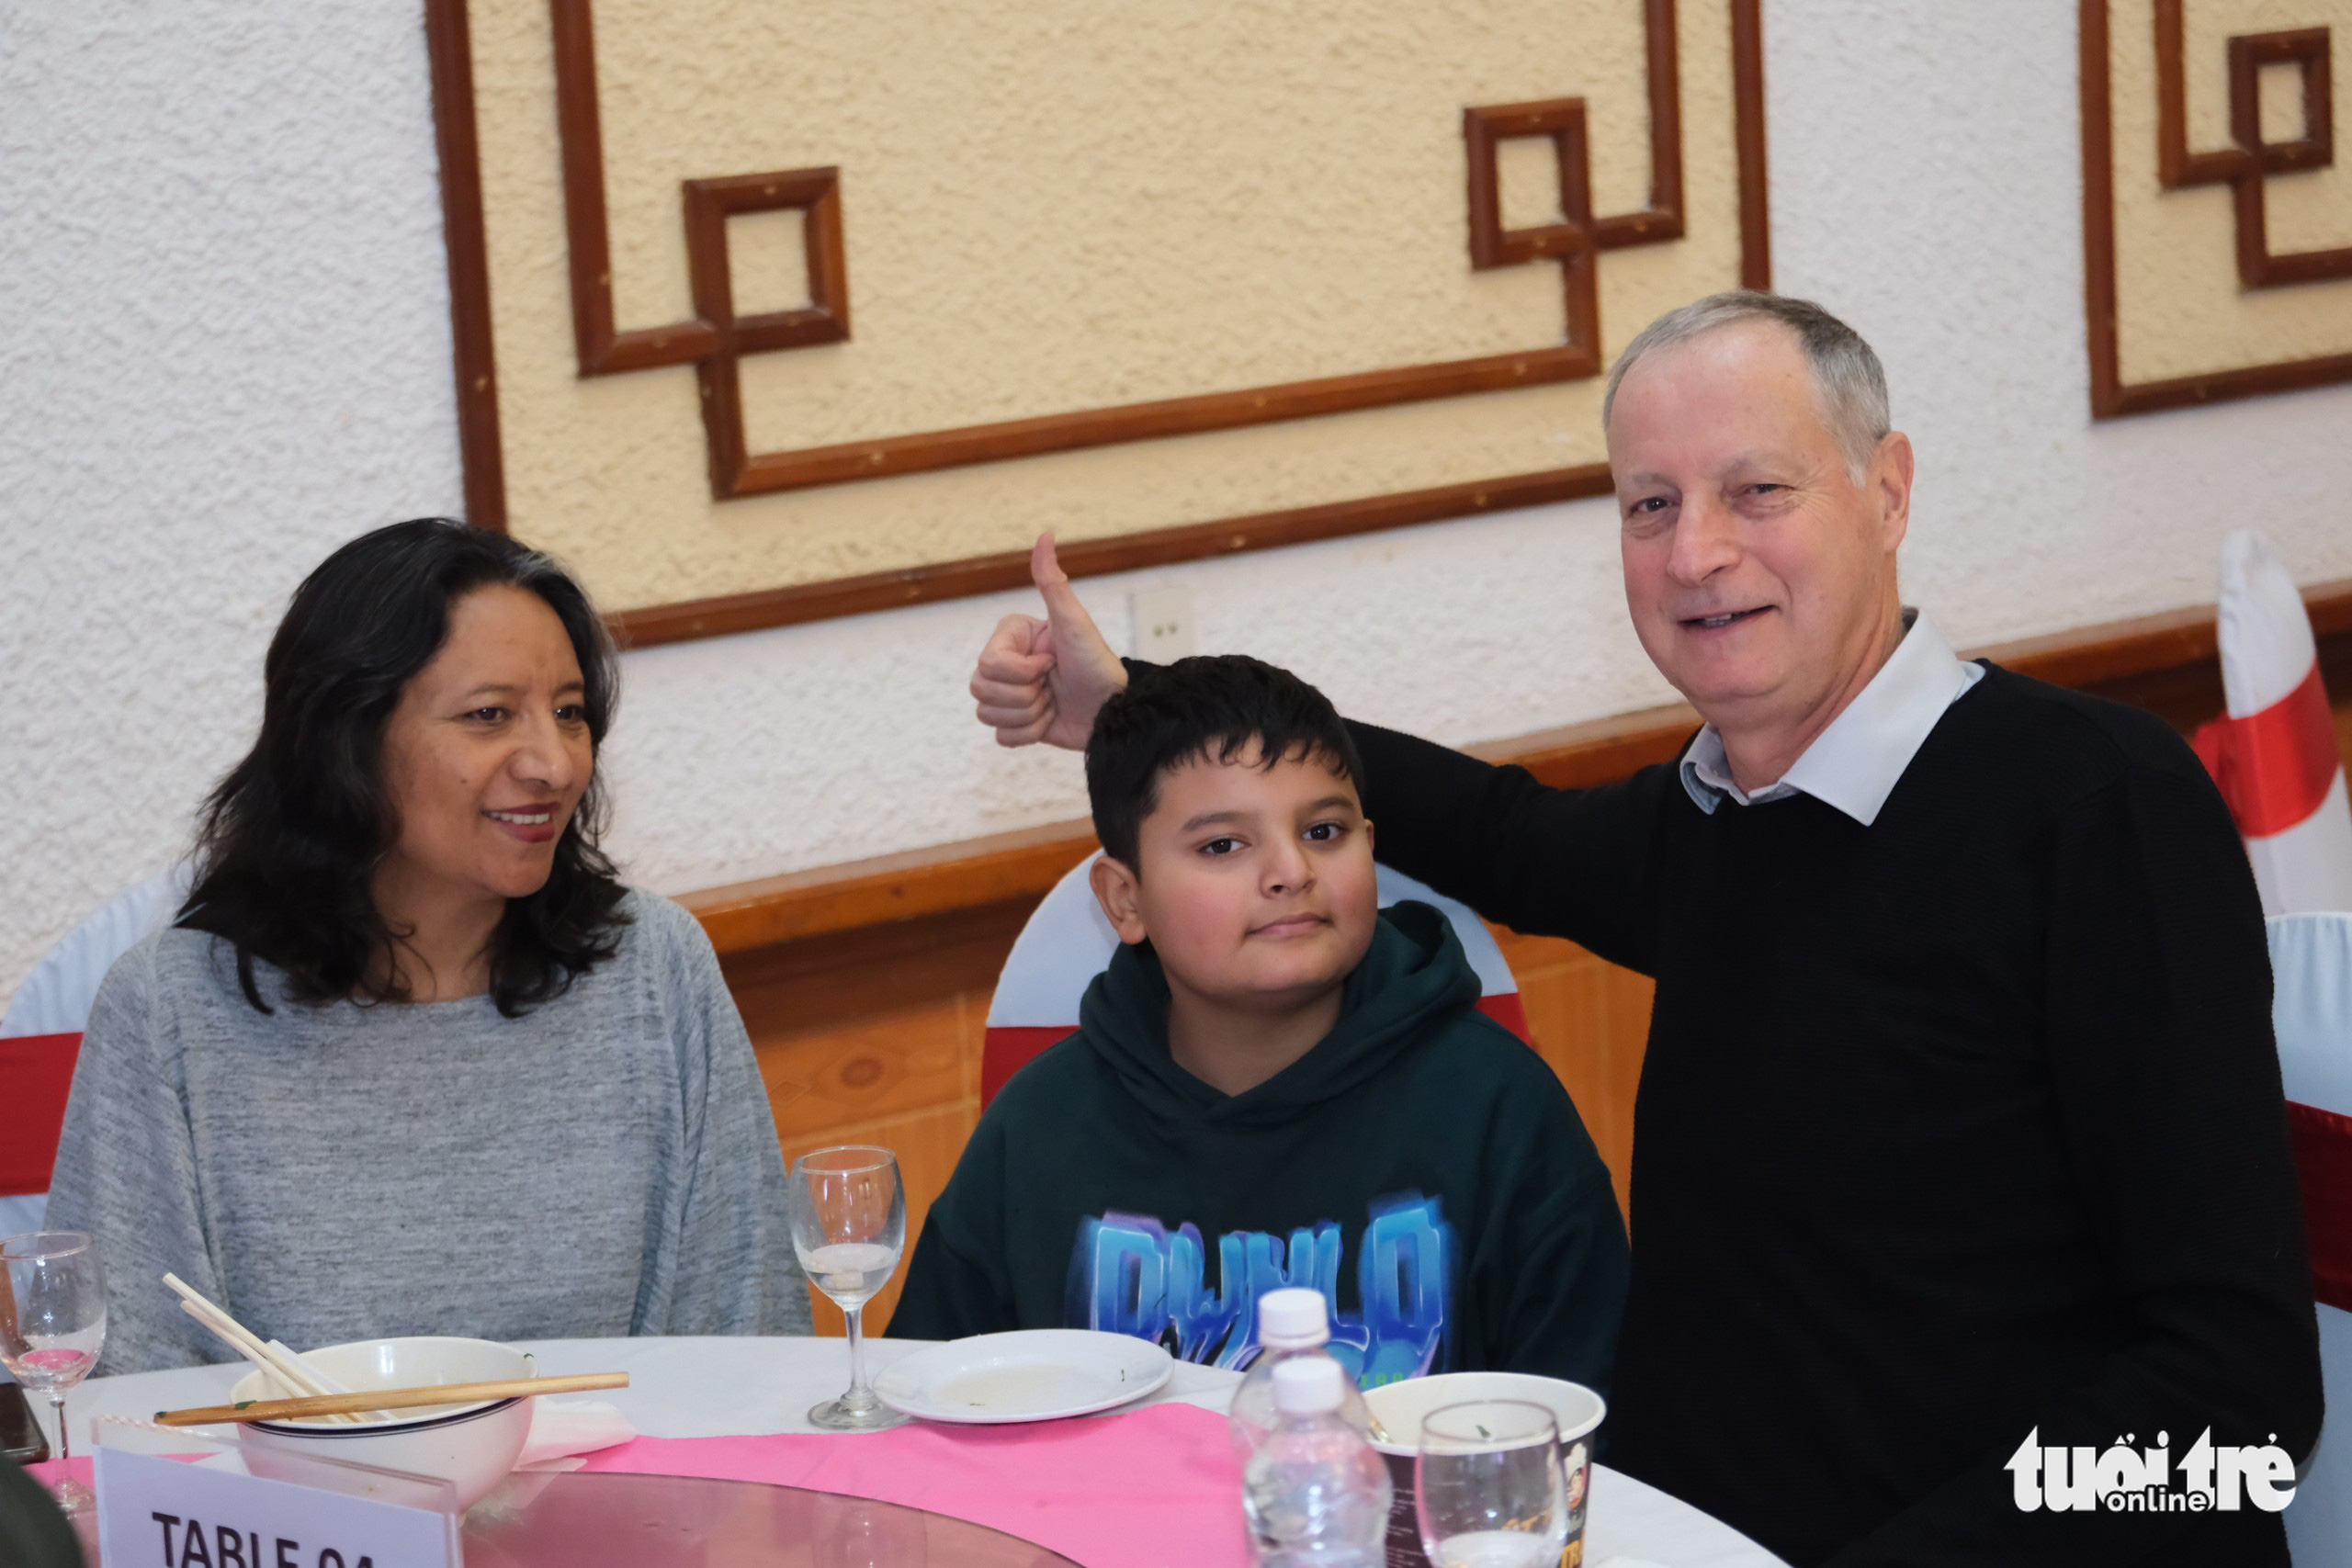 Israeli Ambassador to Vietnam Yaron Mayer (R) and his family members experience pho at the Day of Pho event organized by Tuoi Tre (Youth) newspaper in Nam Dinh Province, Vietnam, December 10, 2022. Photo: Nam Tran / Tuoi Tre